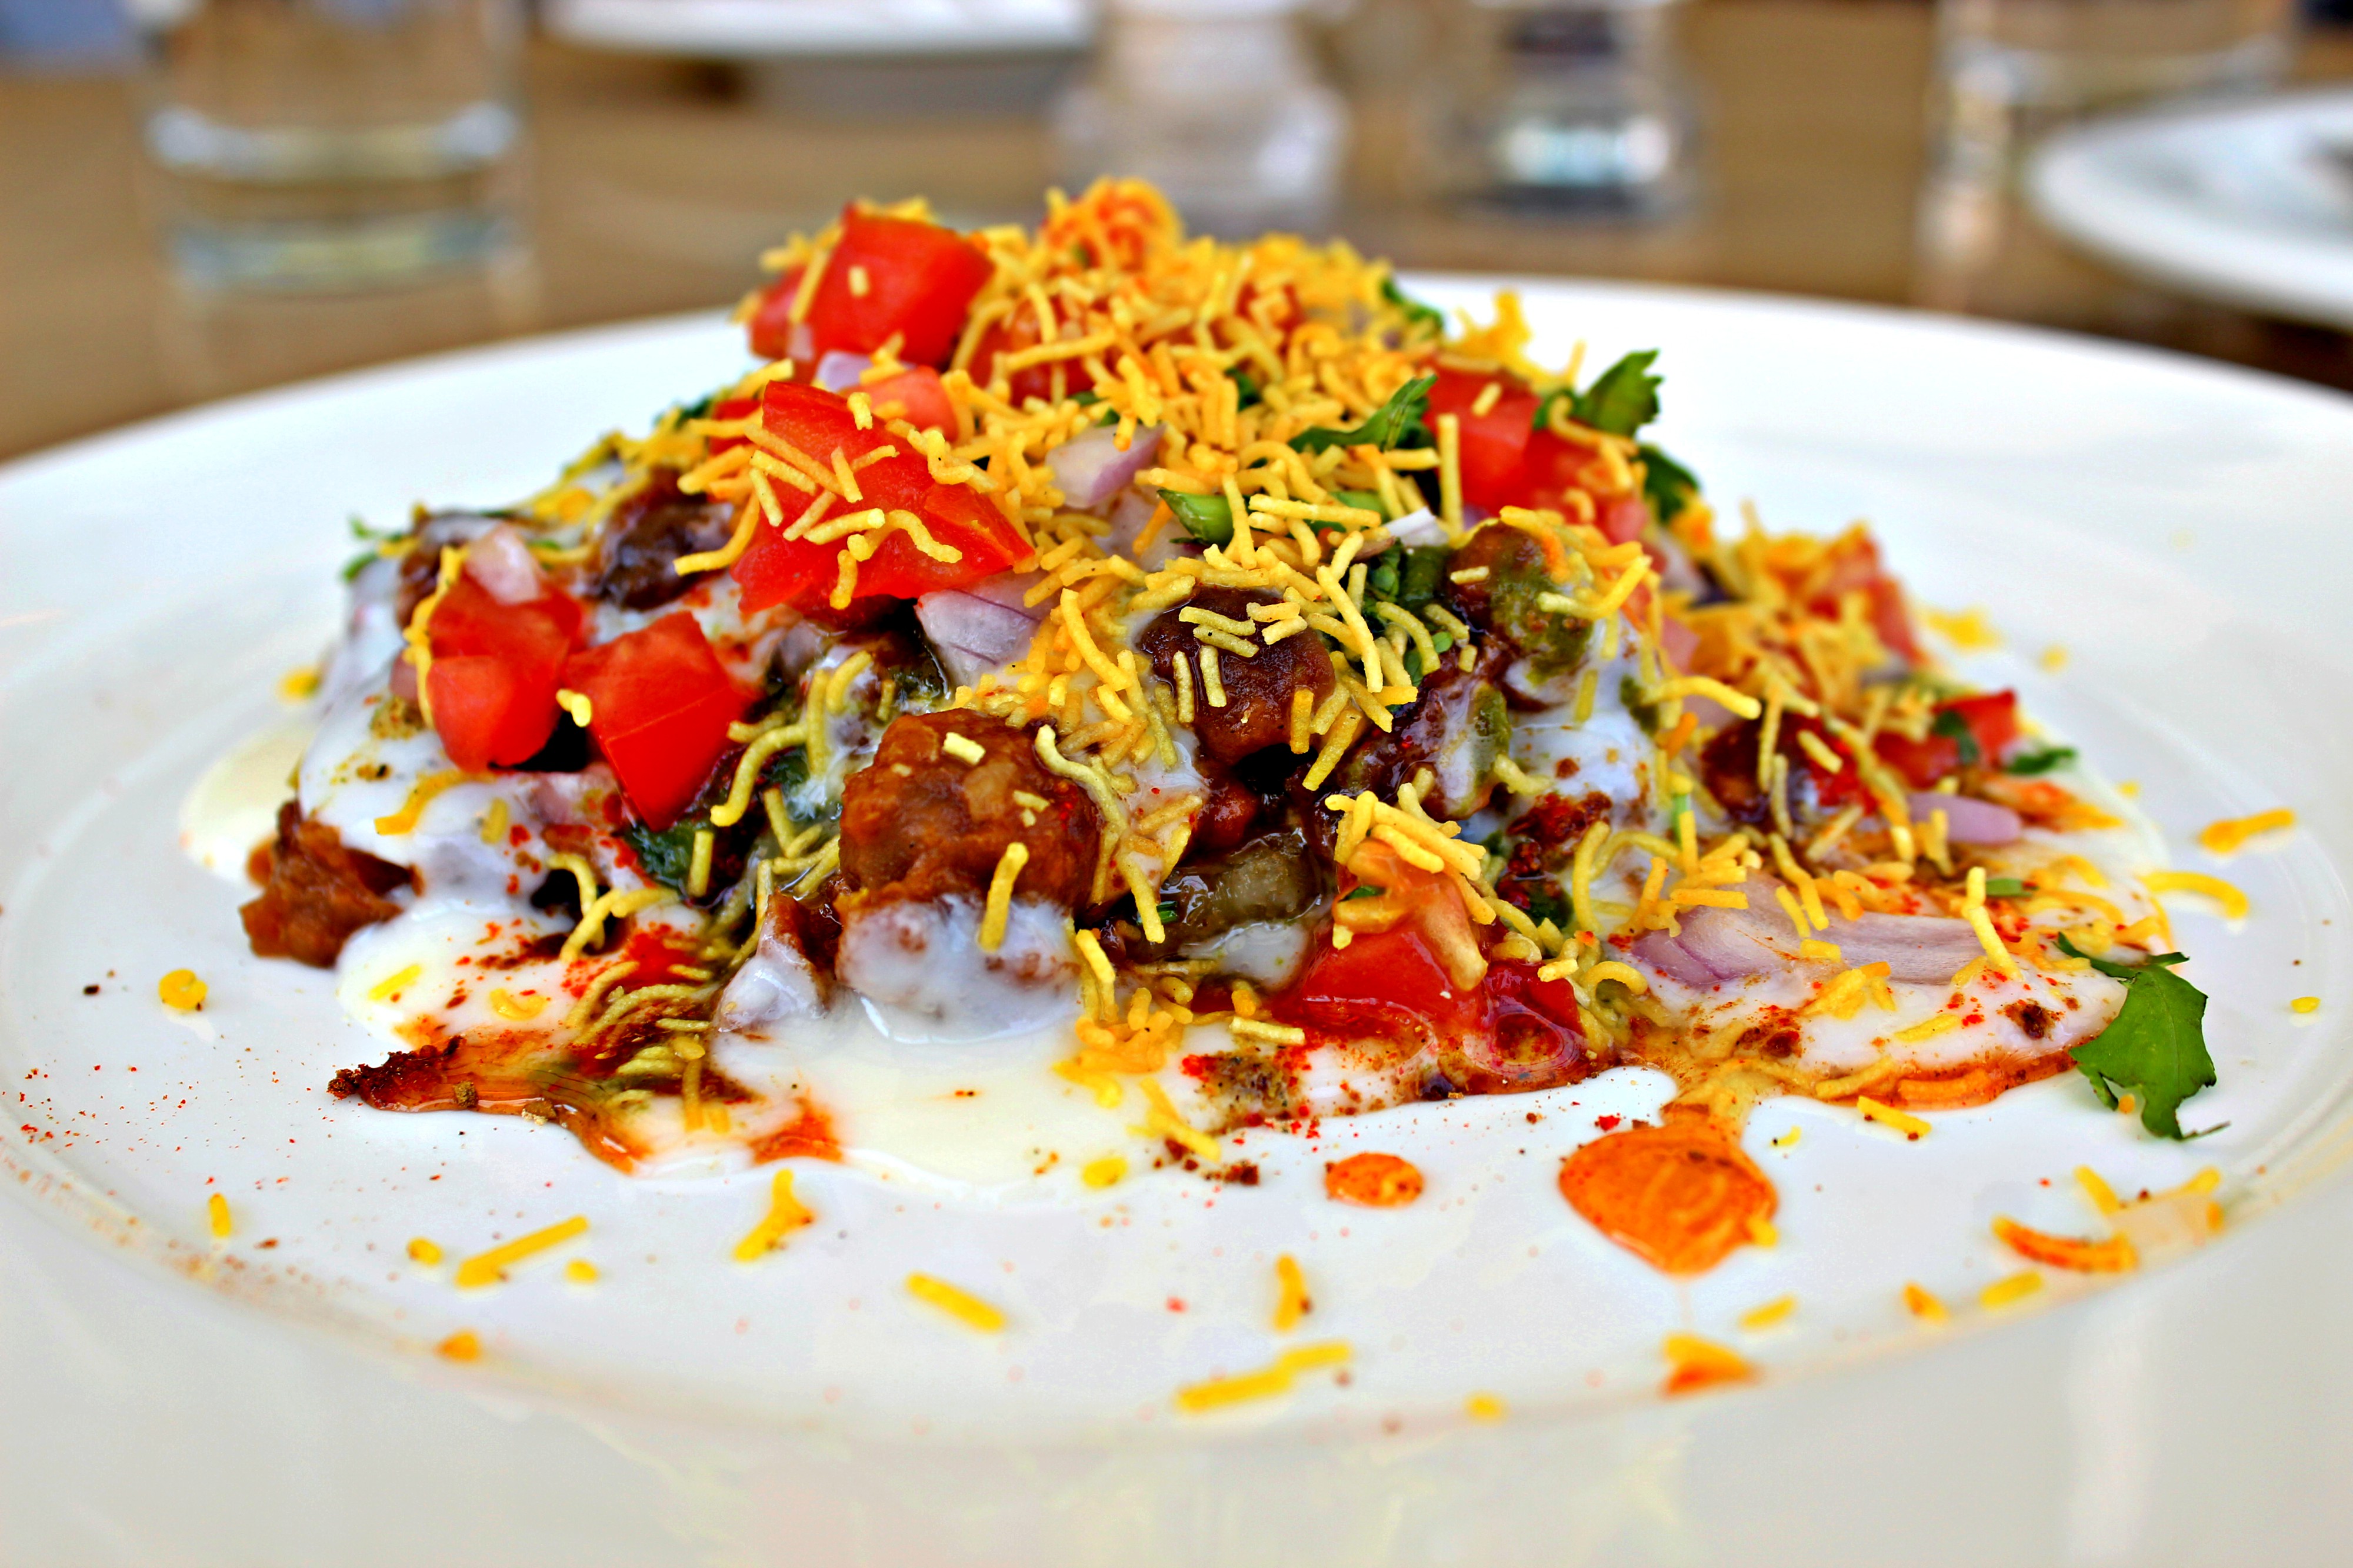 The delicious Aaloo Chaat from the live counter